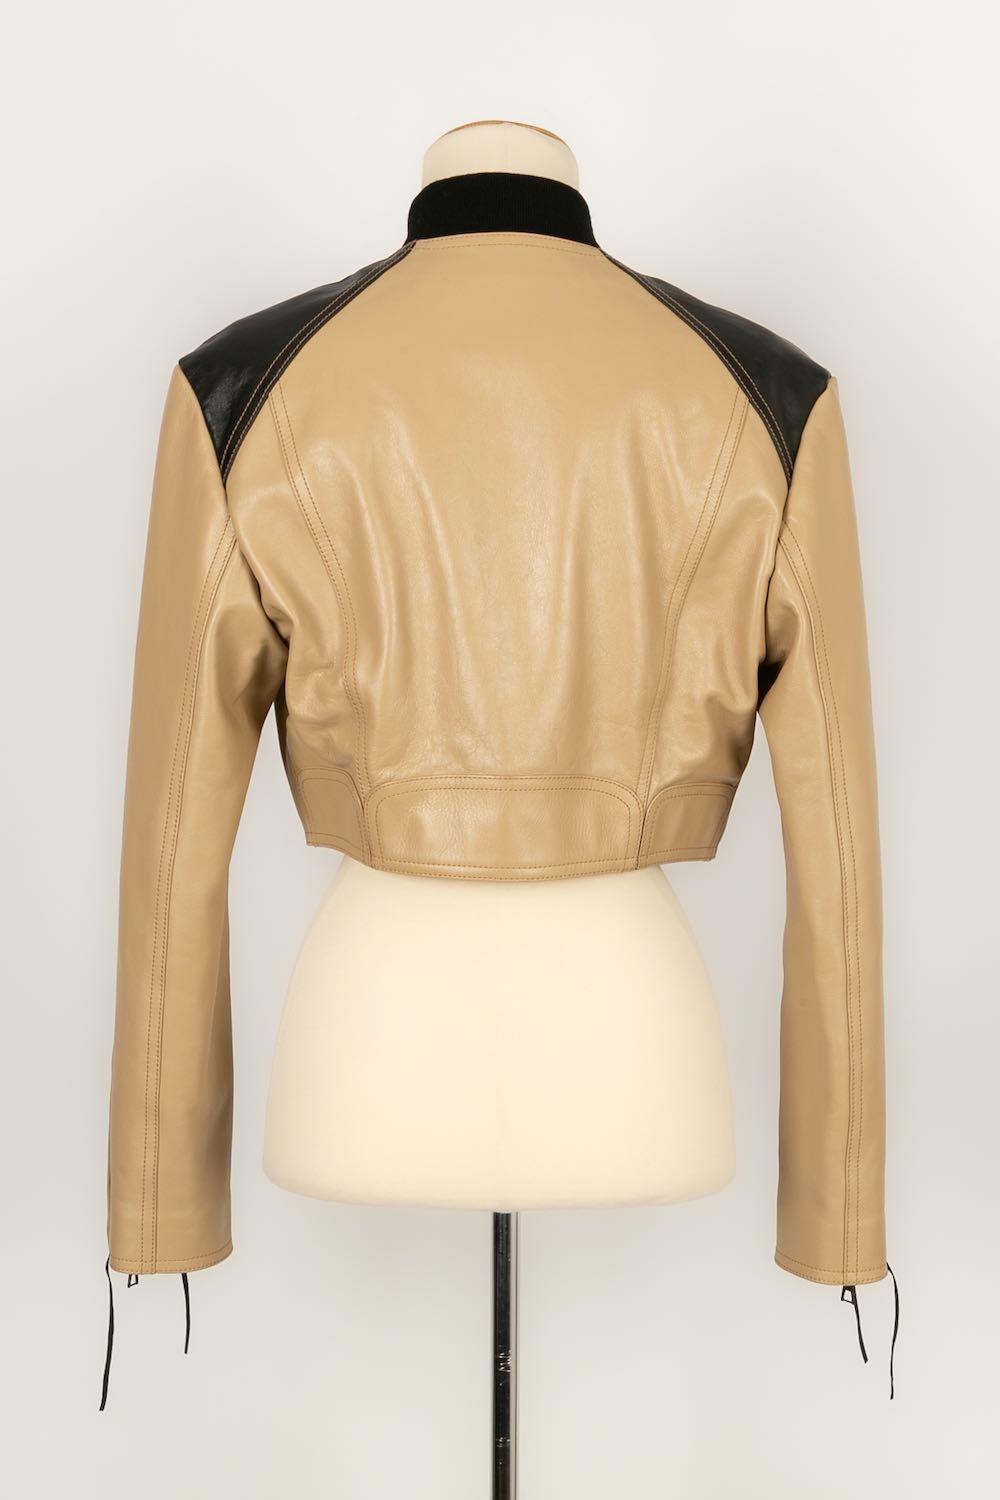 Beige Louis Vuitton Camel Calf Leather Jacket with Black Suede Tie For Sale